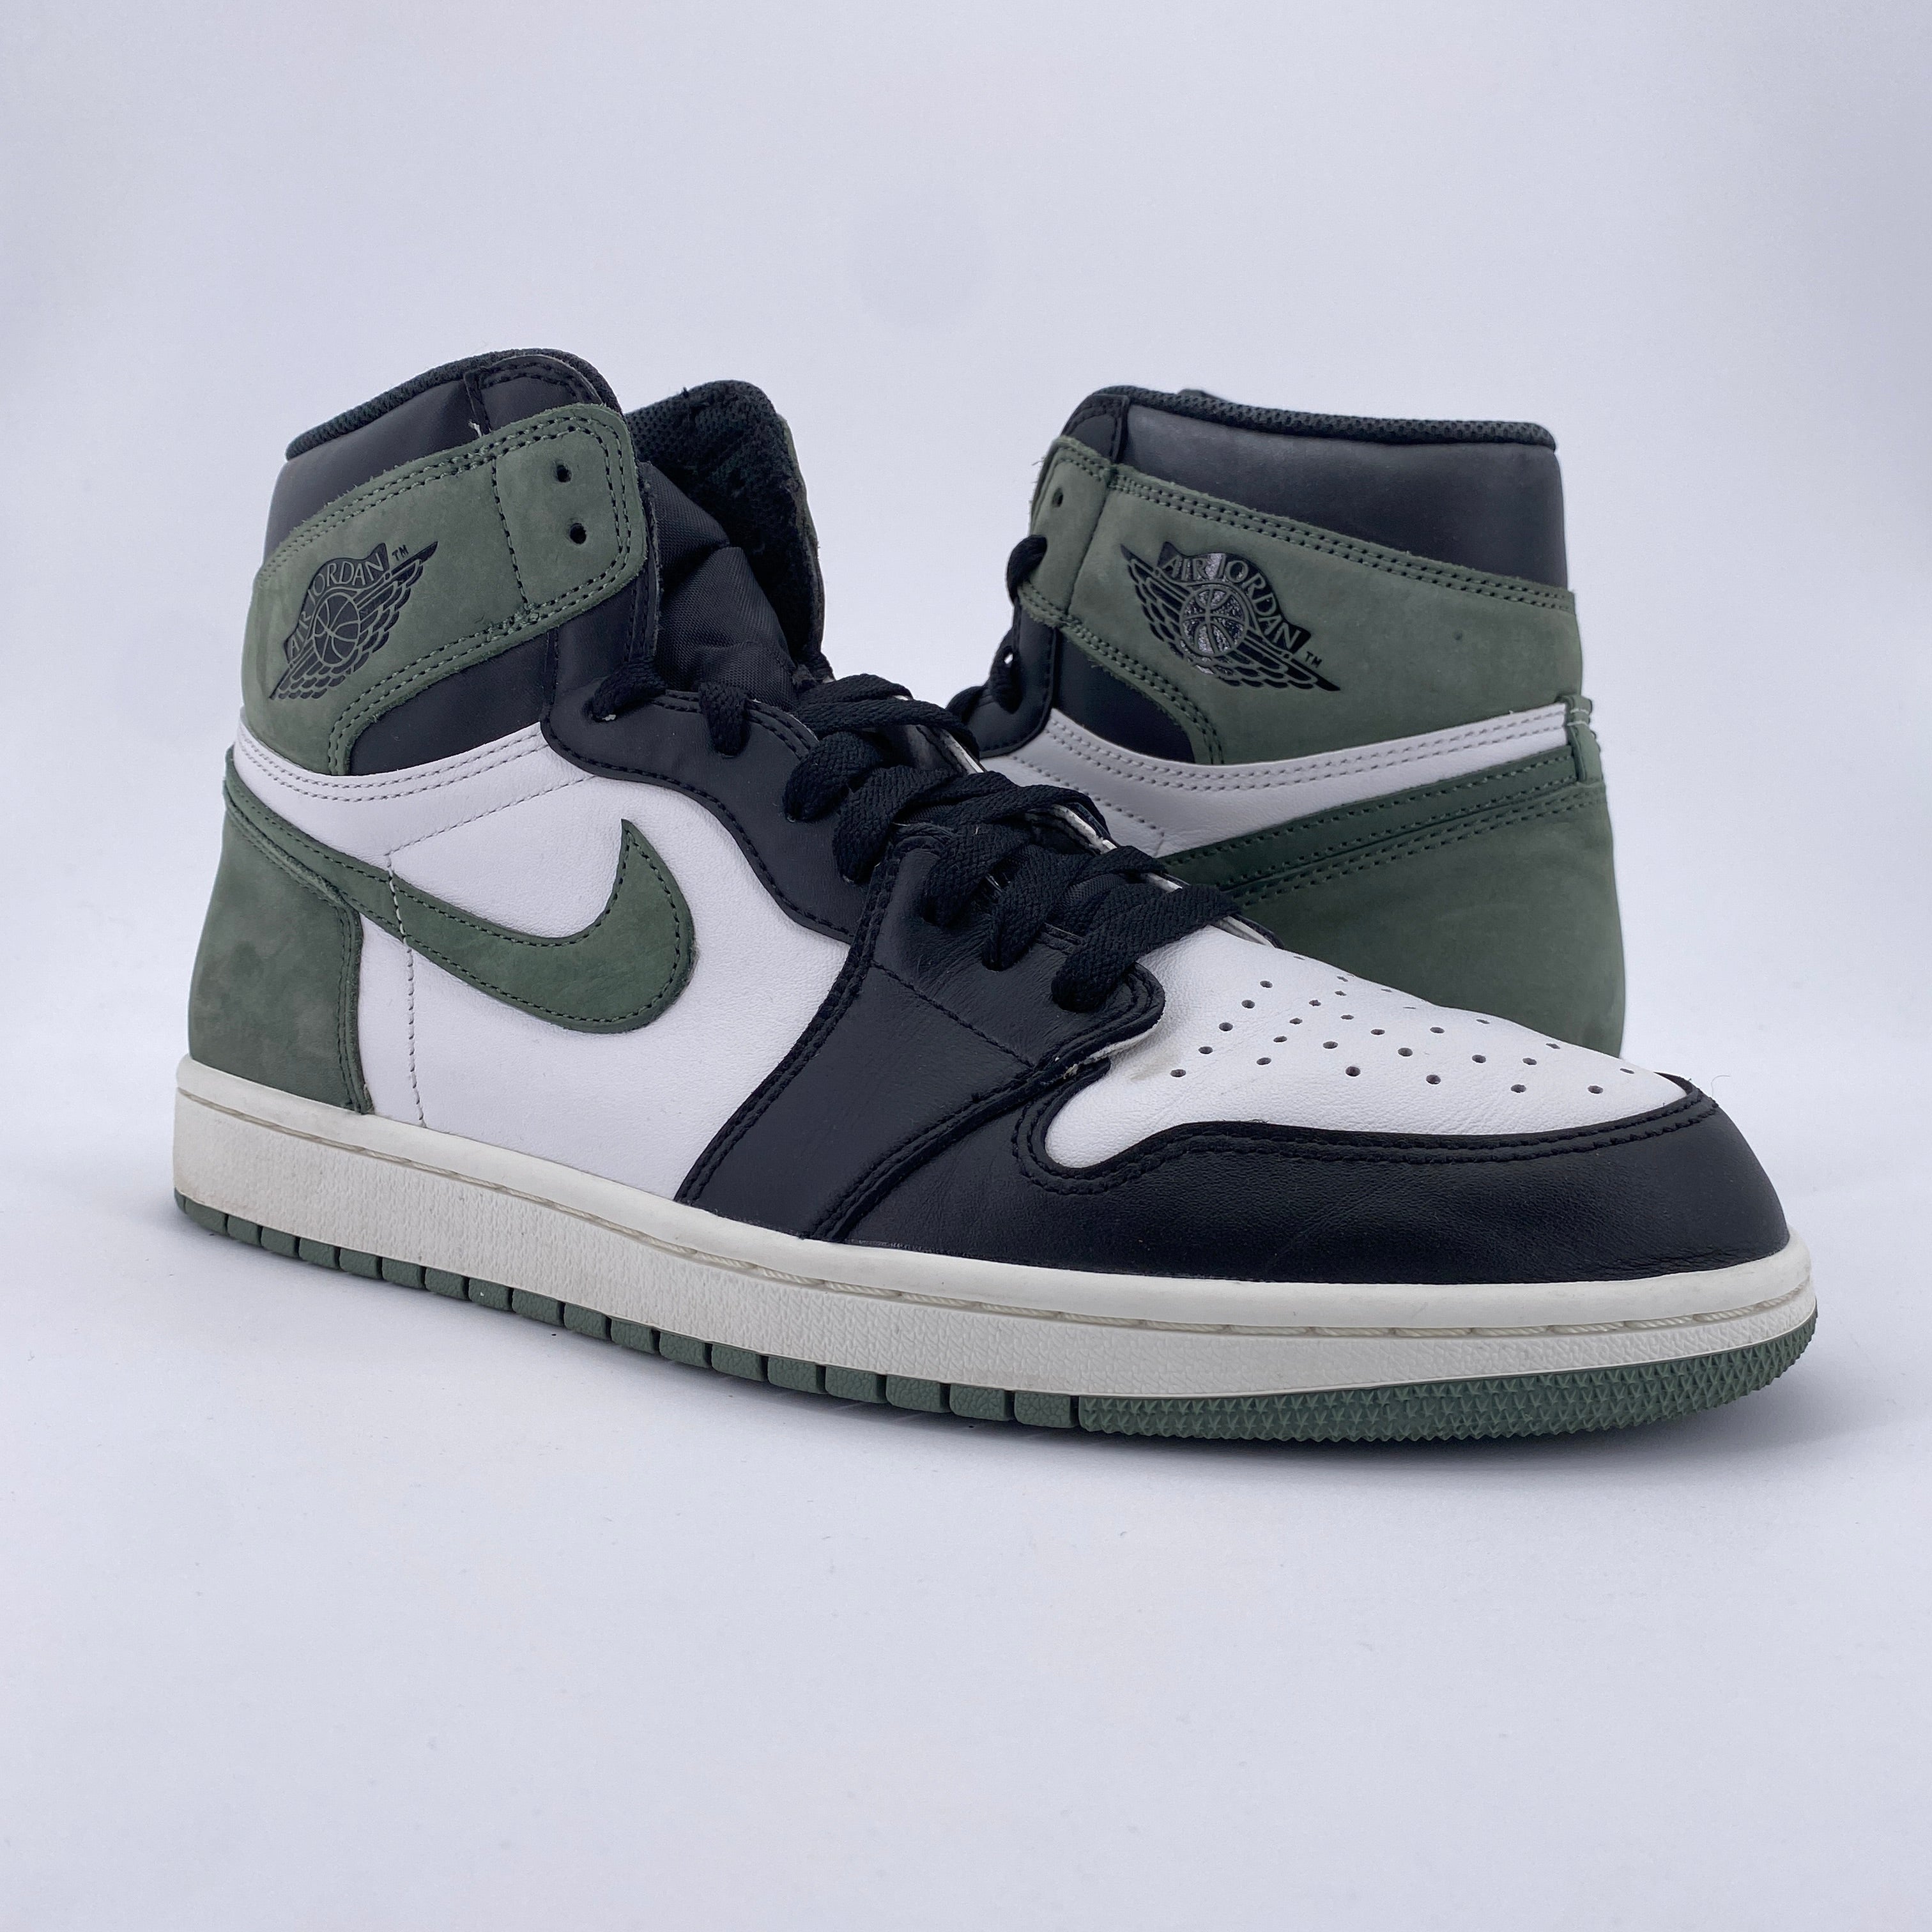 Air Jordan 1 Retro High OG &quot;Clay Green&quot; 2018 Used Size 11.5